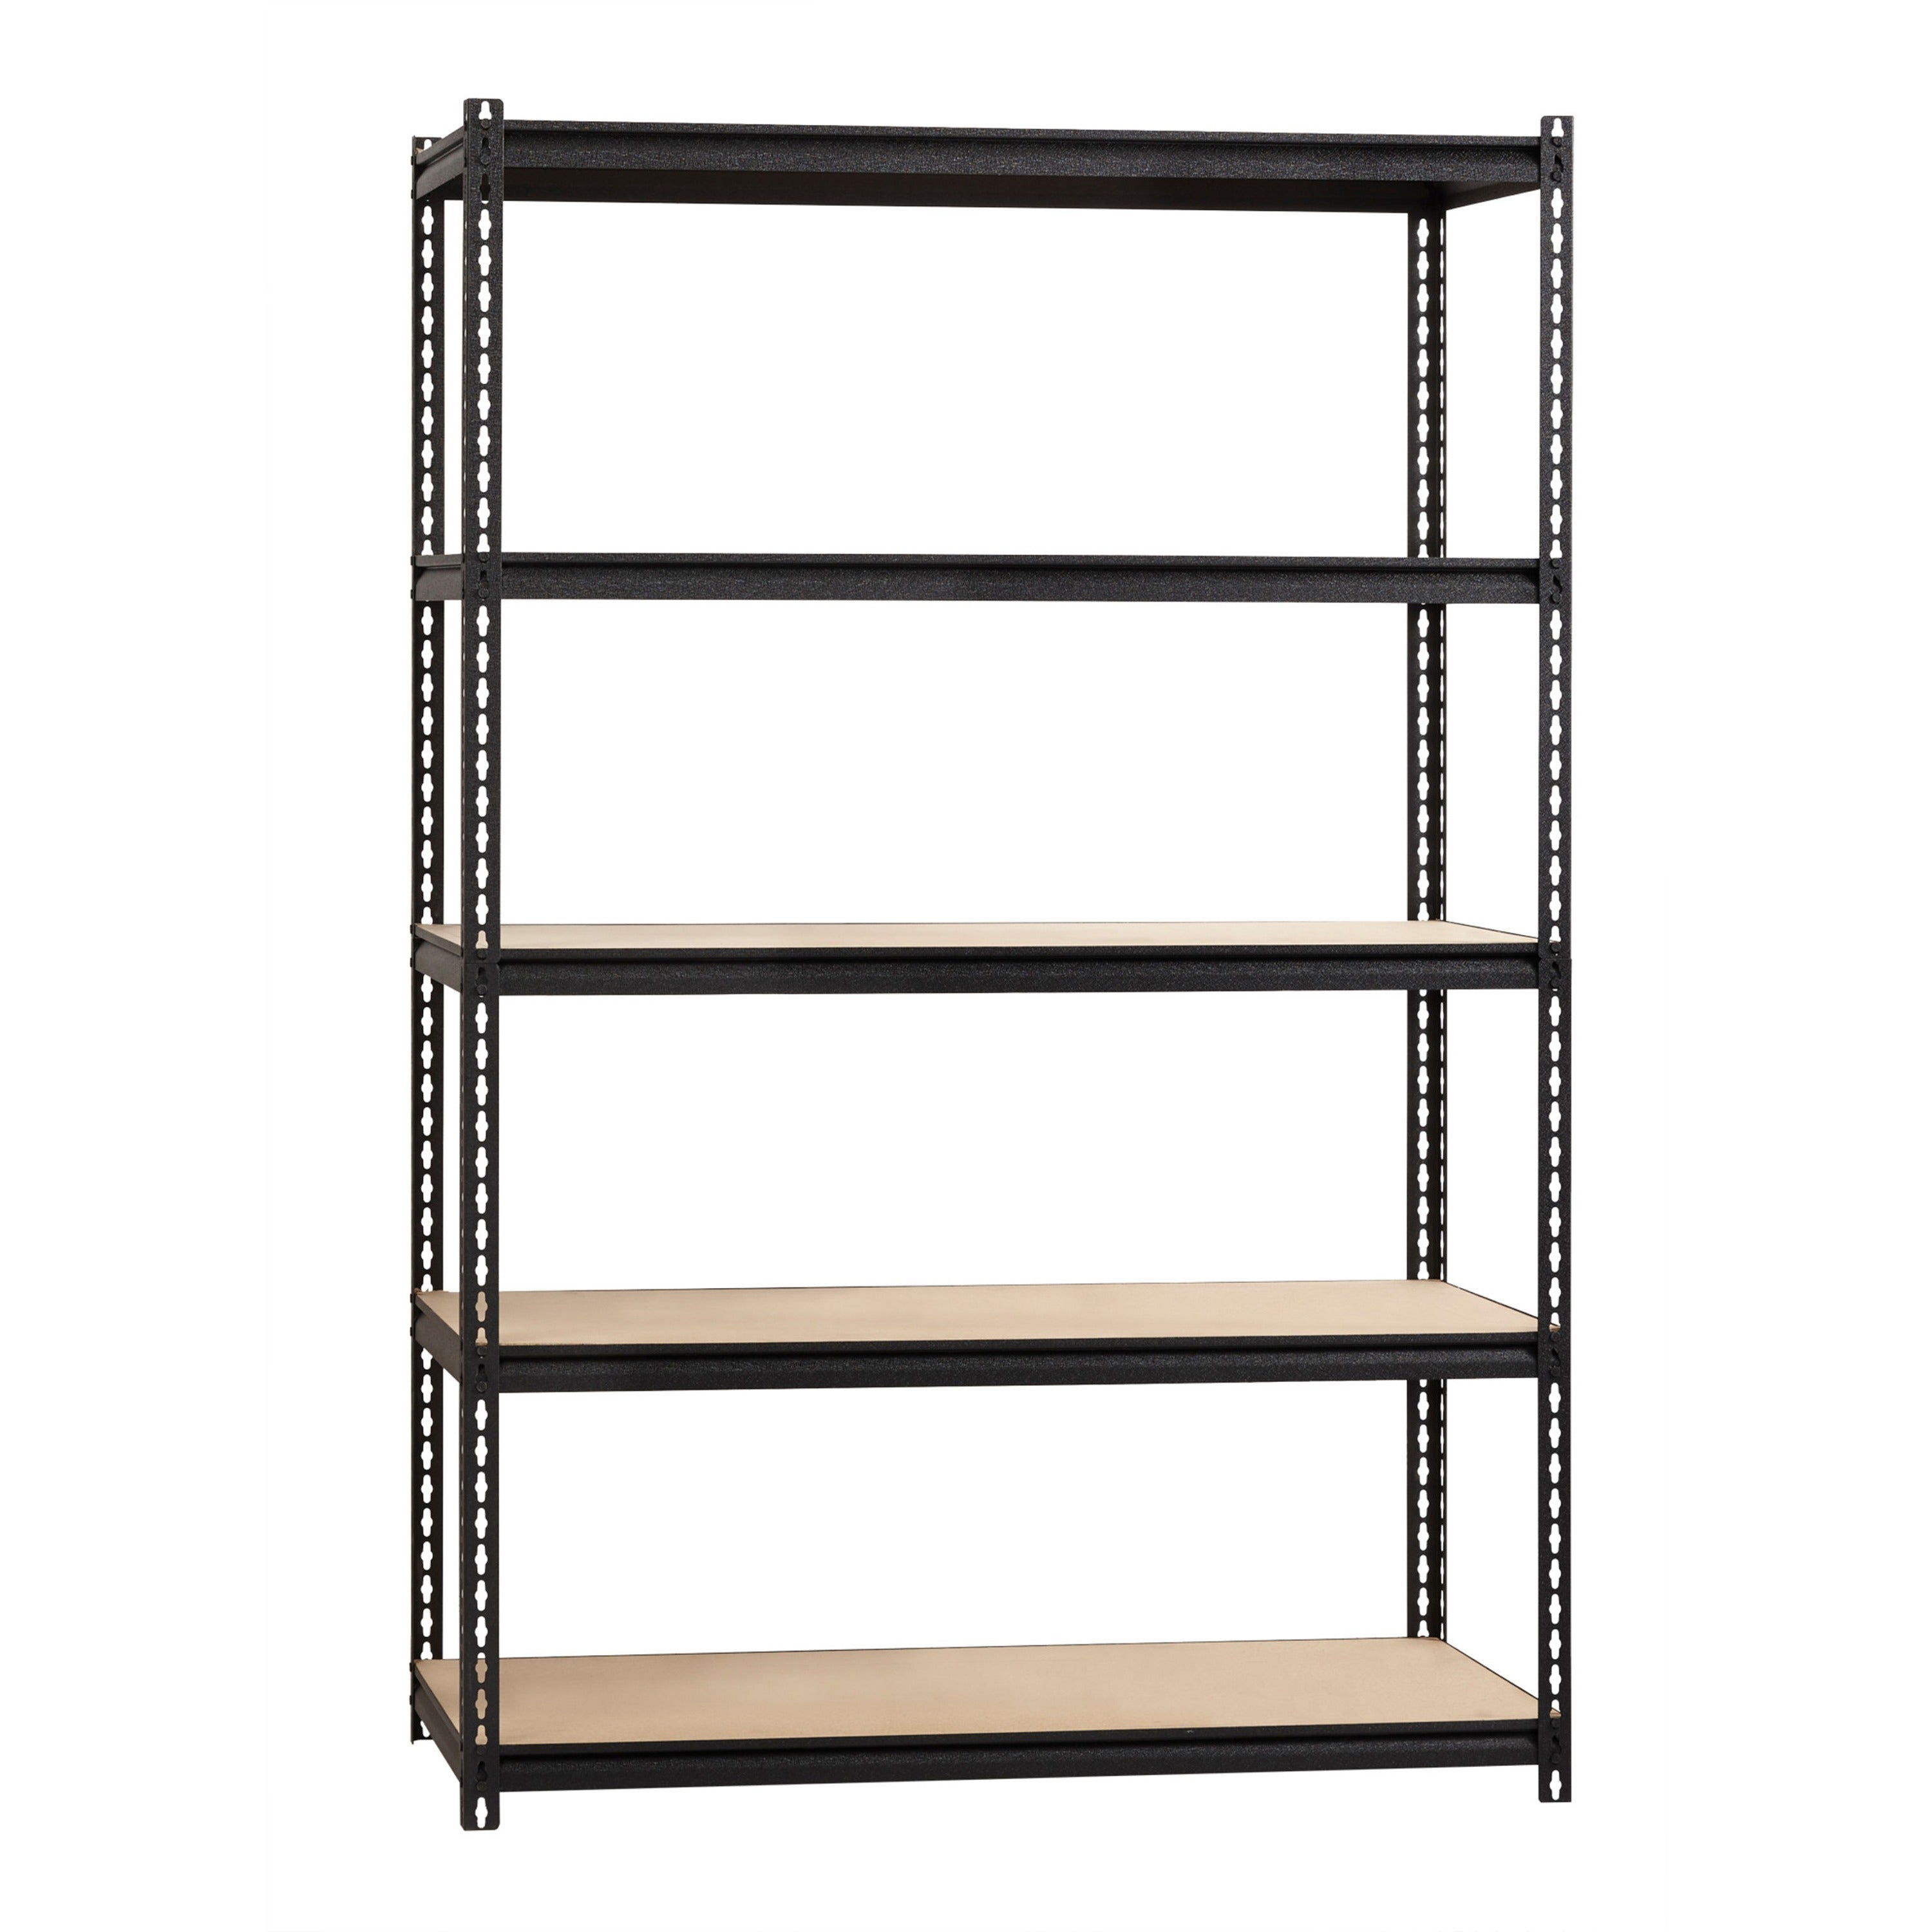 lorell-iron-horse-2300-lb-capacity-riveted-shelving-5-shelfves-72-height-x-48-width-x-24-depth-30%-recycled-black-steel-particleboard-1-each_llr59699 - 1